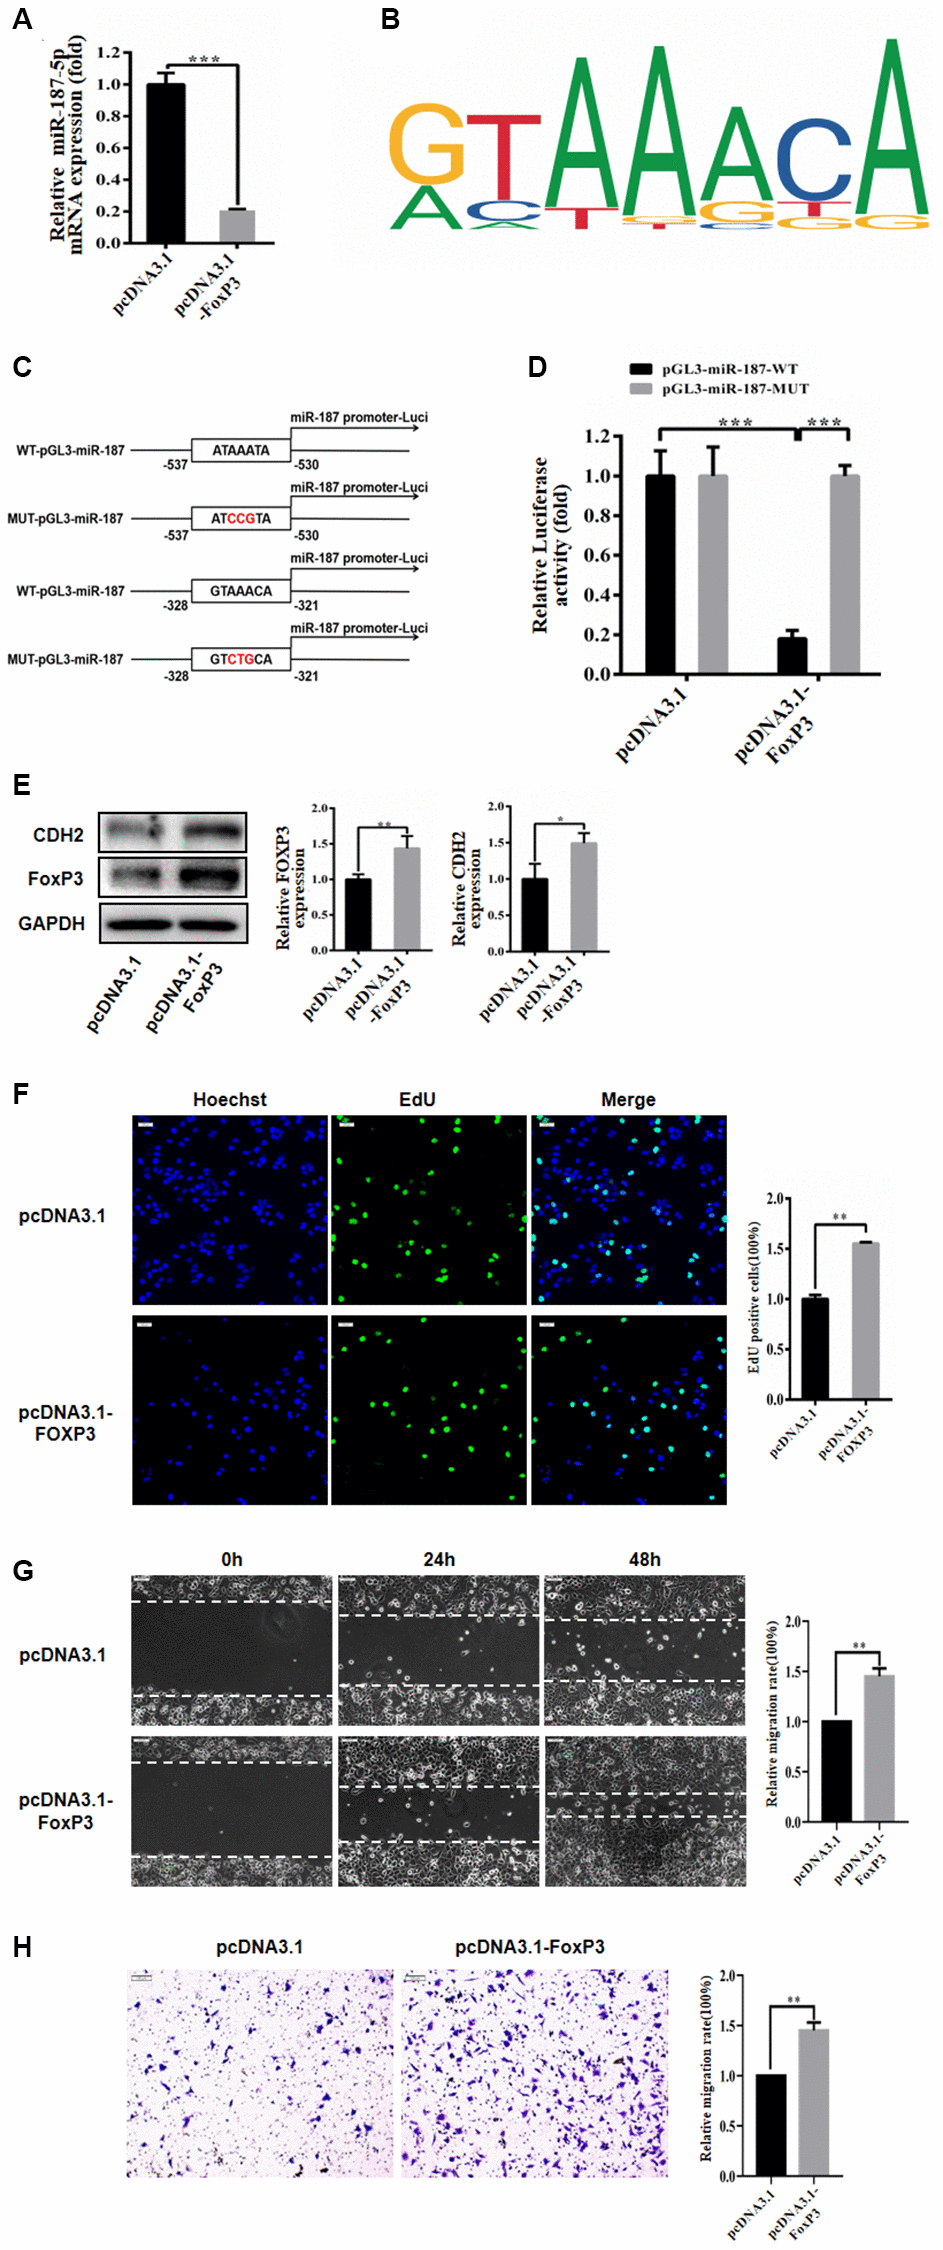 FoxP3 bound to promoter of miR-187-5p. (A) FoxP3 overexpression significantly decreased the expression level of miR-187-5p by RT-qPCR. (B) The FoxP3 binding site in the miR-187-5p promoter region. (C, D) Luciferase reporter assay in HEK-293T cells showed miR-187-5p significantly inhibited the luciferase activity of the vector carrying 3′-UTR of CDH2, compared with control vector. (E) FoxP3 significantly promoted the expression of CDH2 by western blotting. (F) Overexpression of FoxP3 promoted the proliferation of Huh-7 cells through EdU assays. (G) Overexpression FoxP3 increased the rate of wound closure. (H) In Transwell assays, results demonstrated more invasion number of hepatoma cells transfected with FoxP3, compared with control. The experiments were repeated at least 3 independent times. (F–H) Data was presented as mean ± SD from three independent experiments. *P **P ***p 